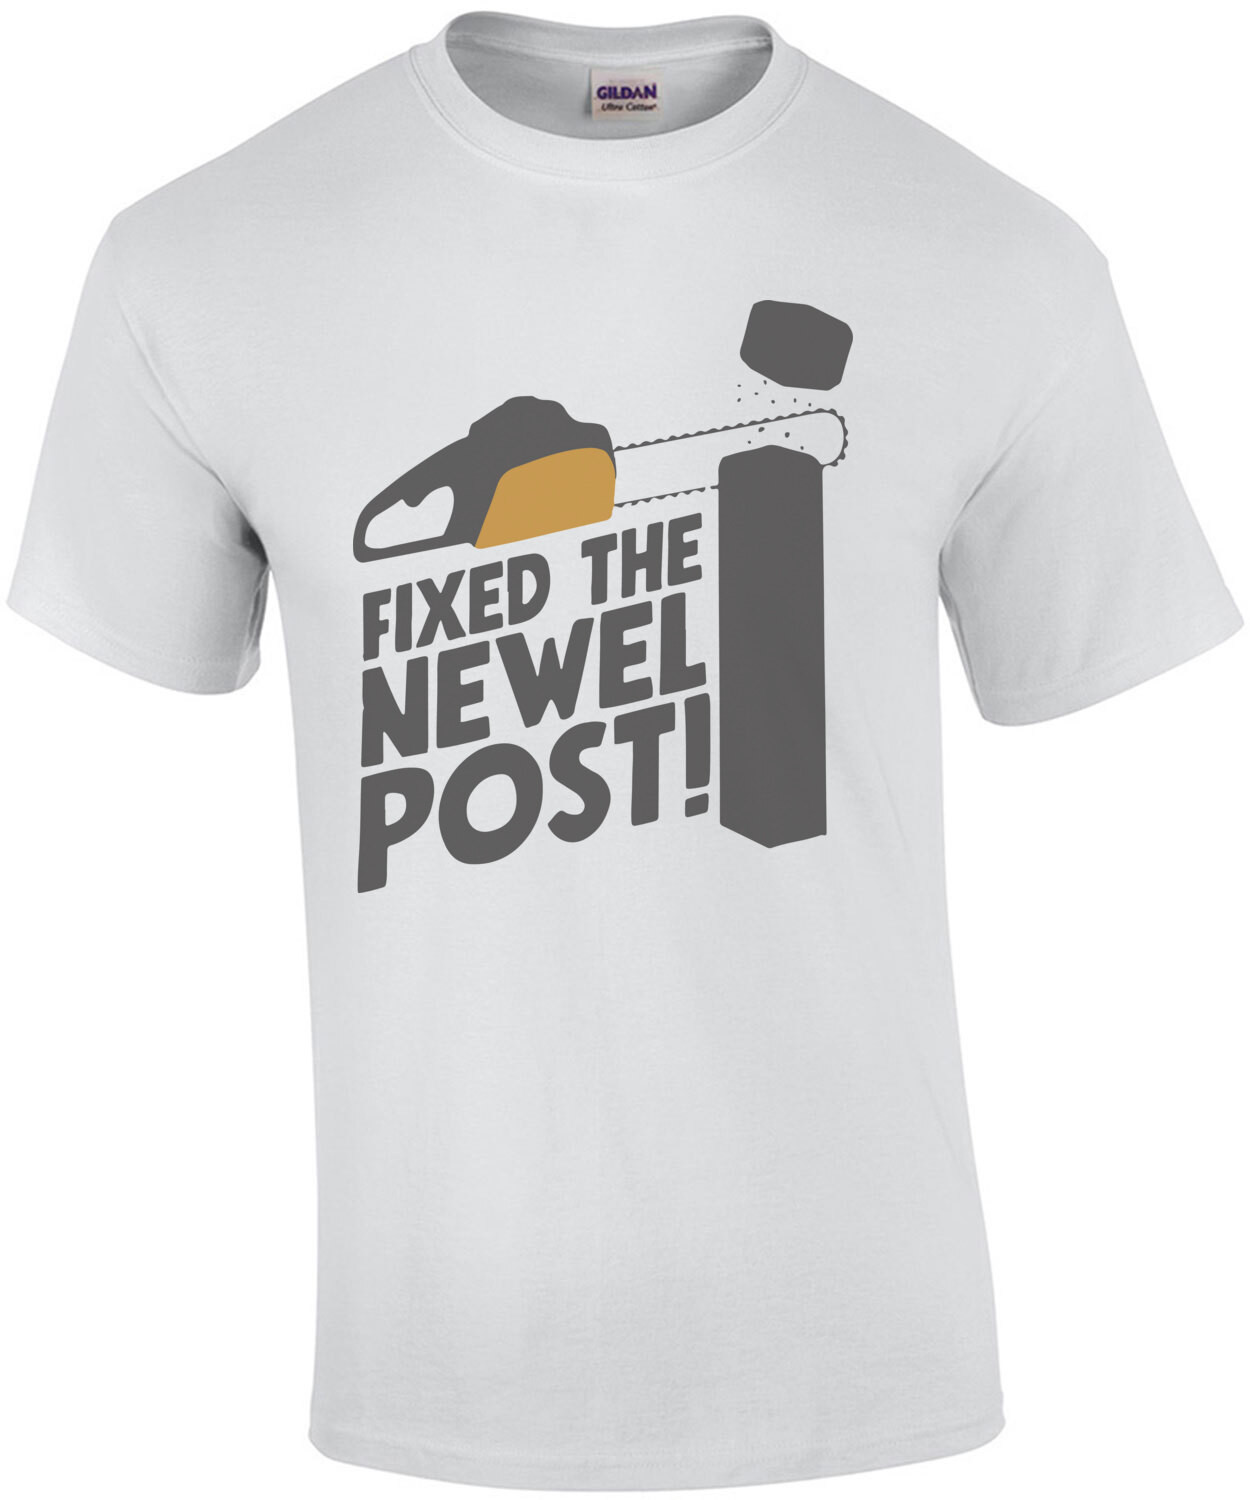 Fixed The Newel Post - Christmas Vacation T-Shirt 